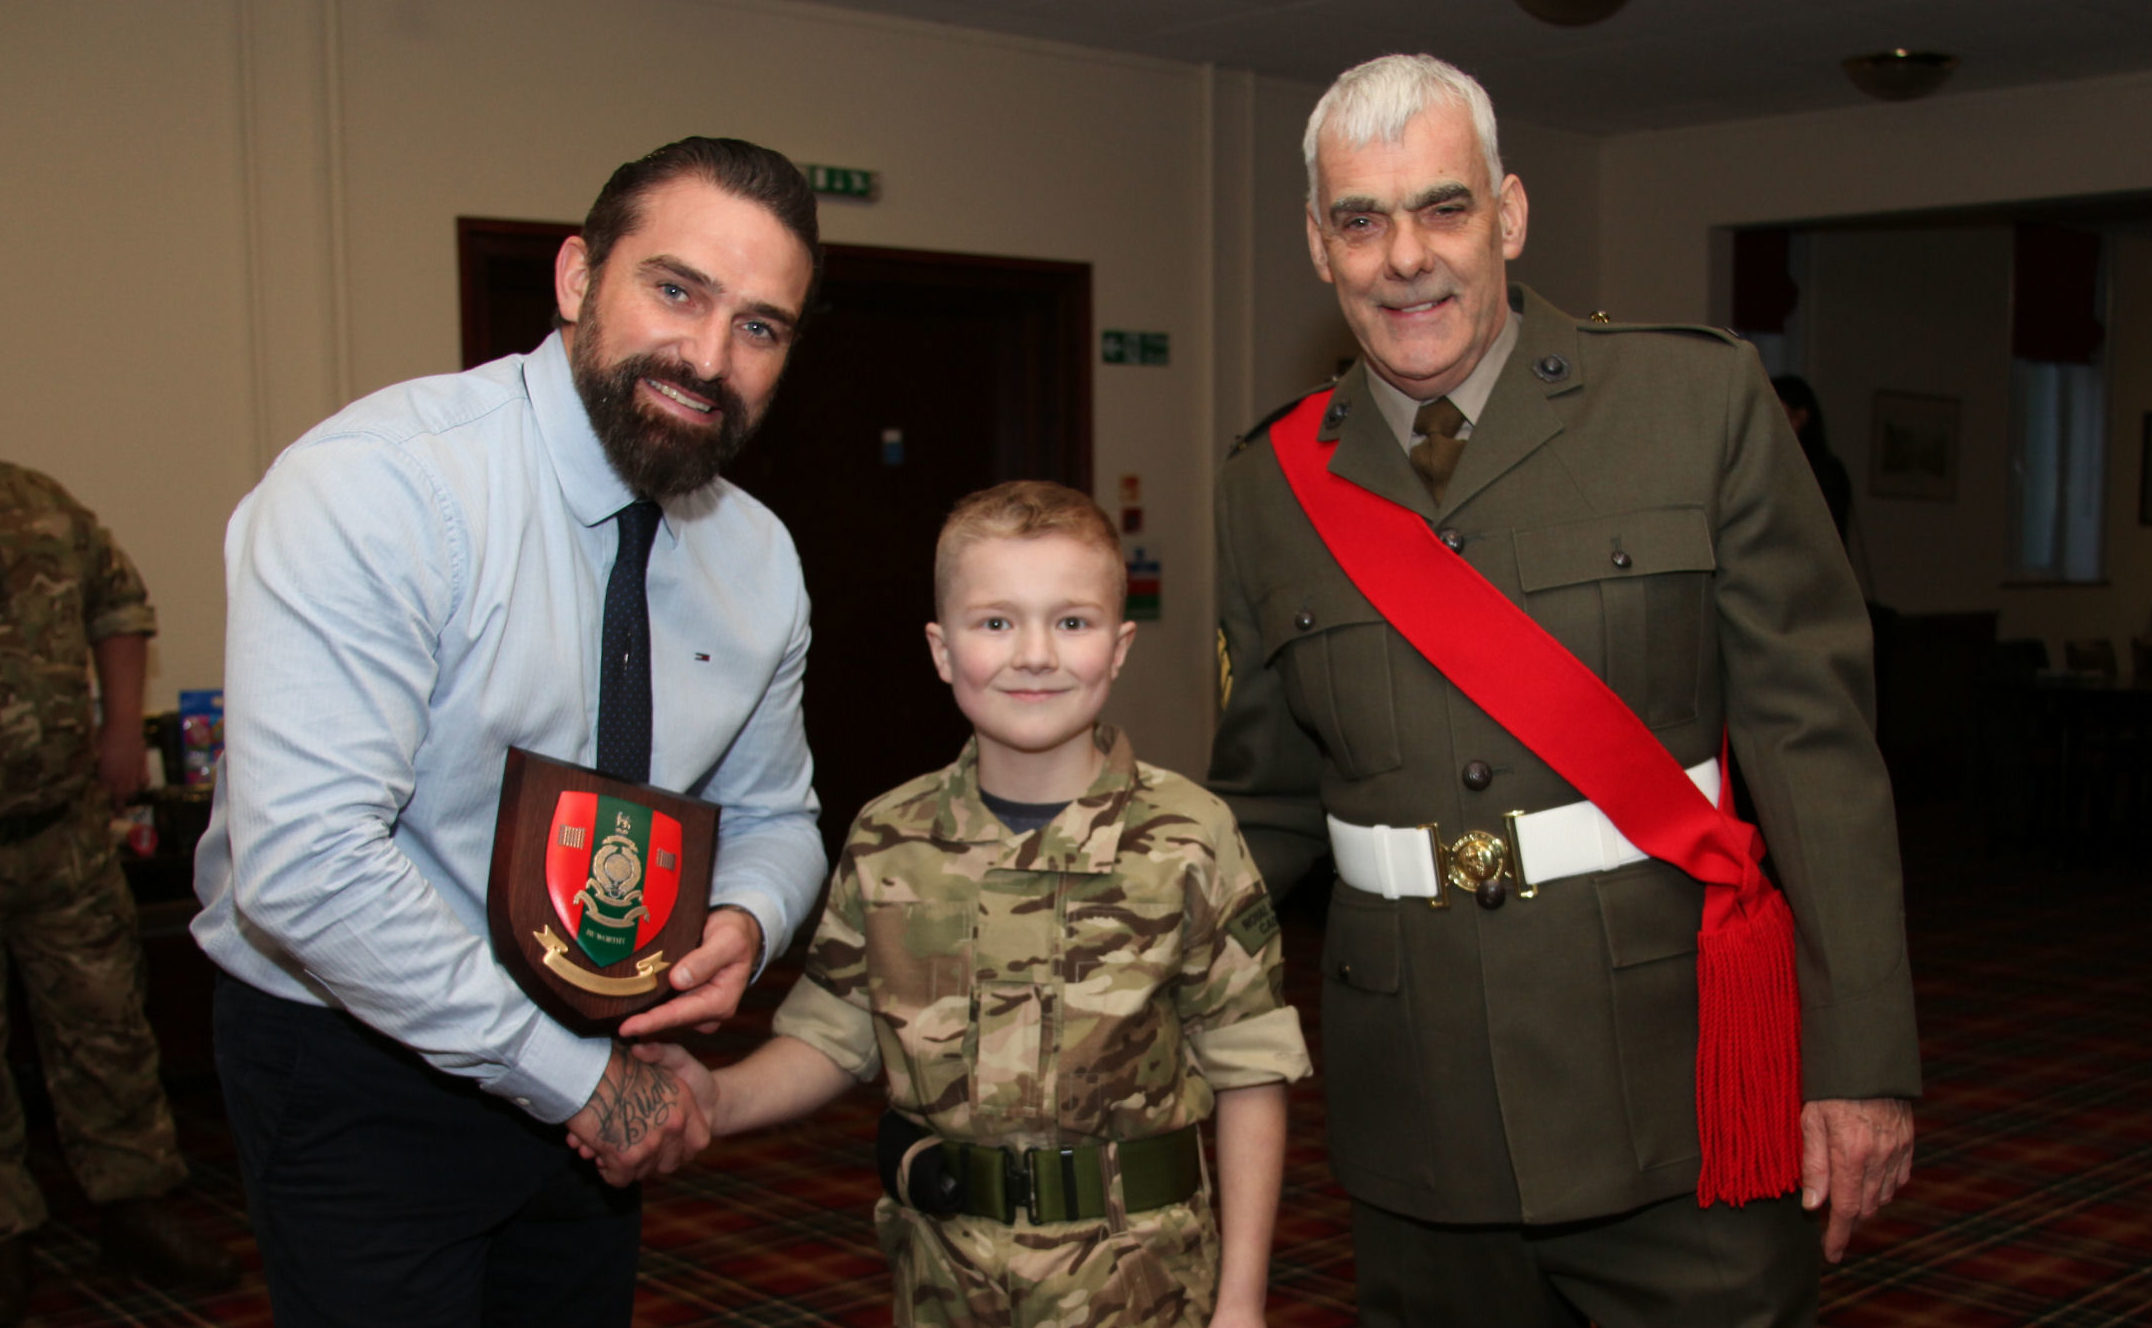 Cadet Daniel Baldwin, who received the Belle Isle Cup top award, presenting Ant Middleton with a Troop 181 Plaque with cadet instructor Colour Sergeant Derek McNulty.